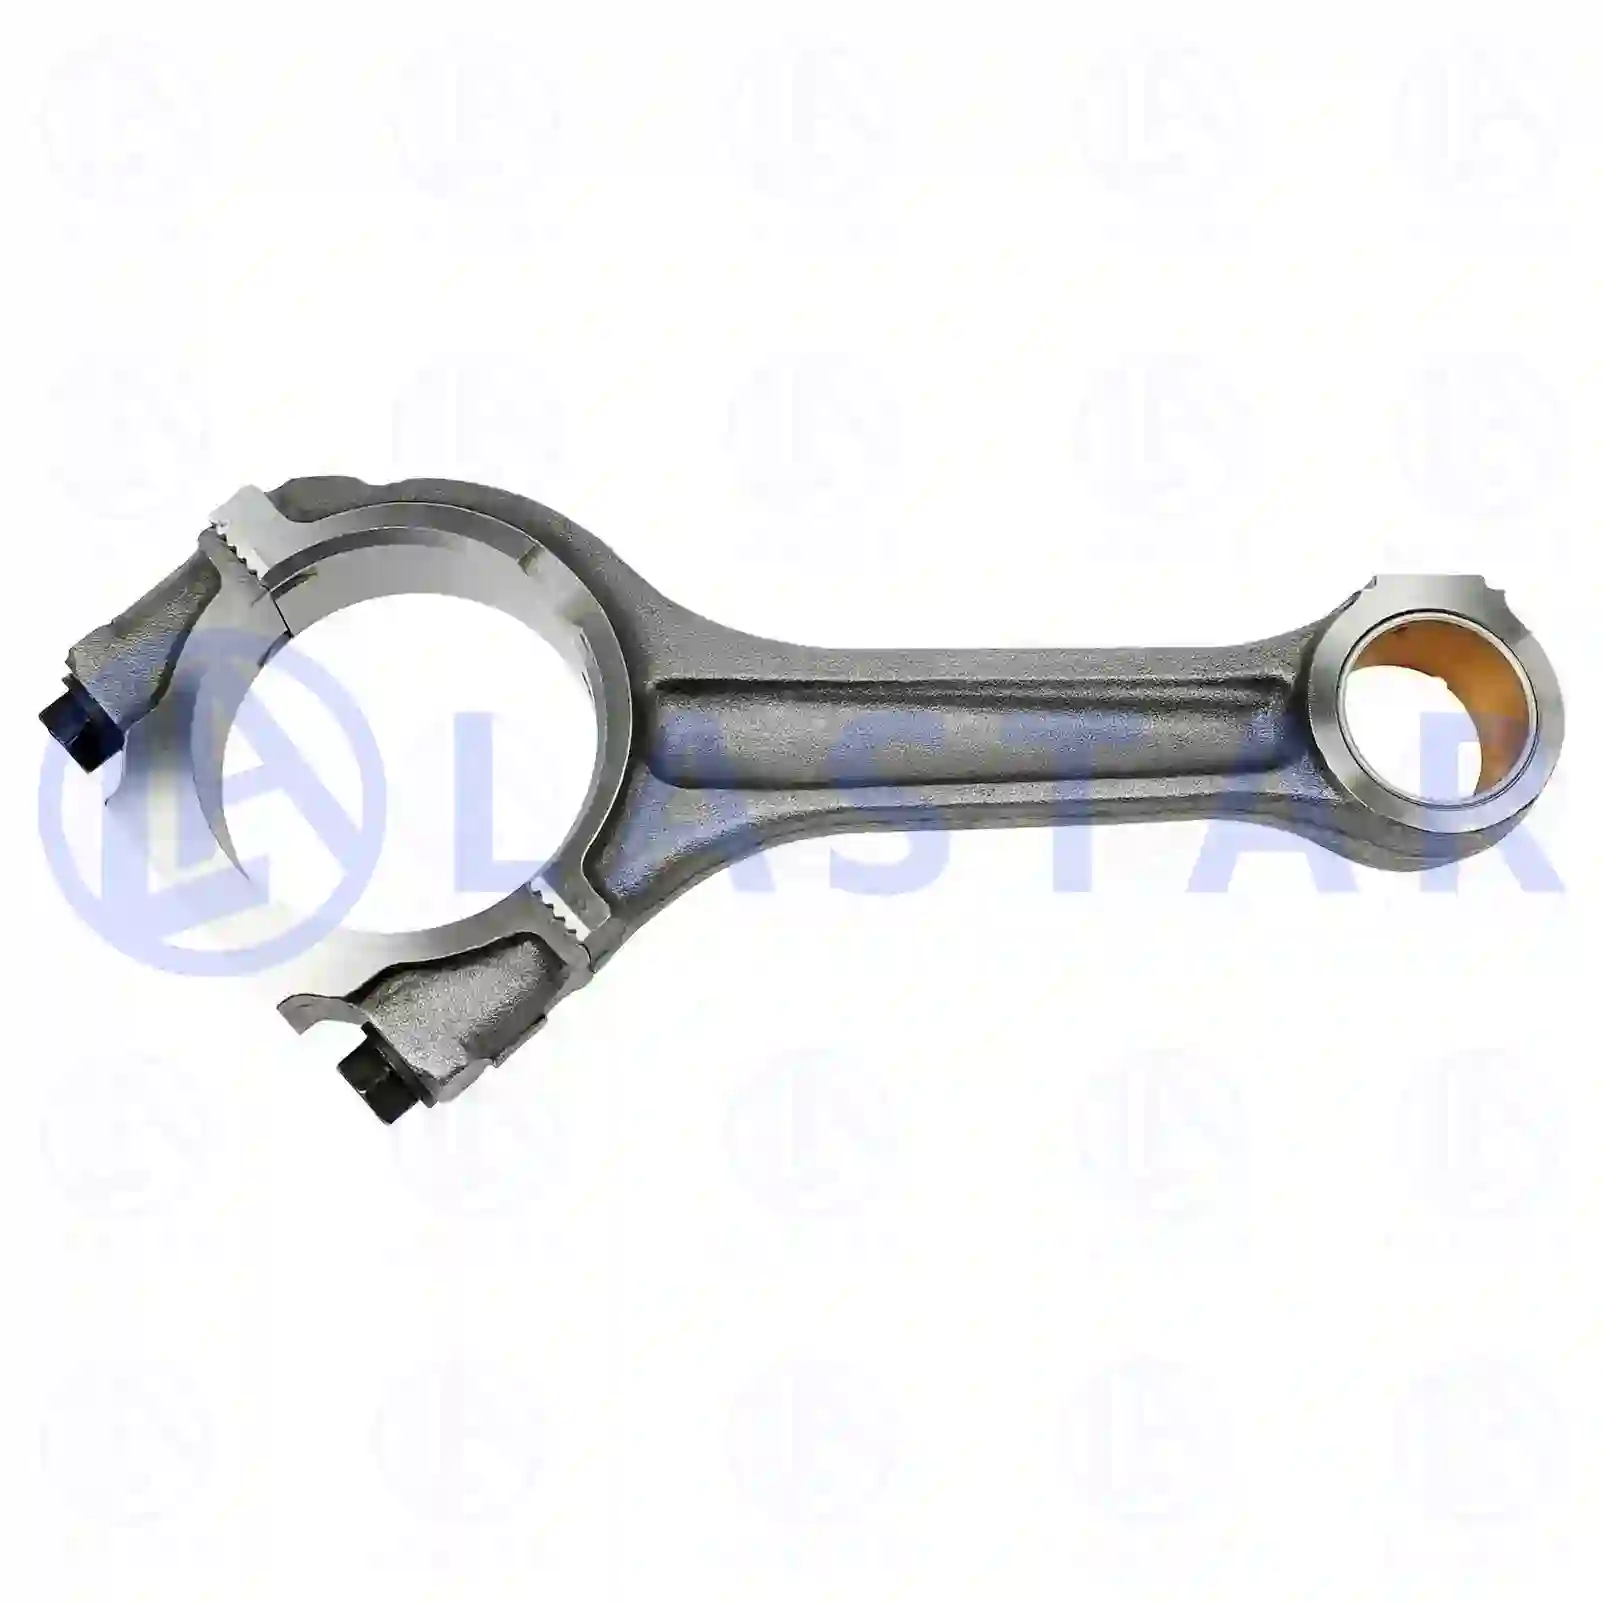 Connecting rod, straight head, 77701936, 51024016141, 51024016214, 51024016244, 51024016264, 51024016281, 4070300020, 4070300720, 4470300220, 4470300420, 447030042080, 4470300520, 4660300020, 4660300220 ||  77701936 Lastar Spare Part | Truck Spare Parts, Auotomotive Spare Parts Connecting rod, straight head, 77701936, 51024016141, 51024016214, 51024016244, 51024016264, 51024016281, 4070300020, 4070300720, 4470300220, 4470300420, 447030042080, 4470300520, 4660300020, 4660300220 ||  77701936 Lastar Spare Part | Truck Spare Parts, Auotomotive Spare Parts